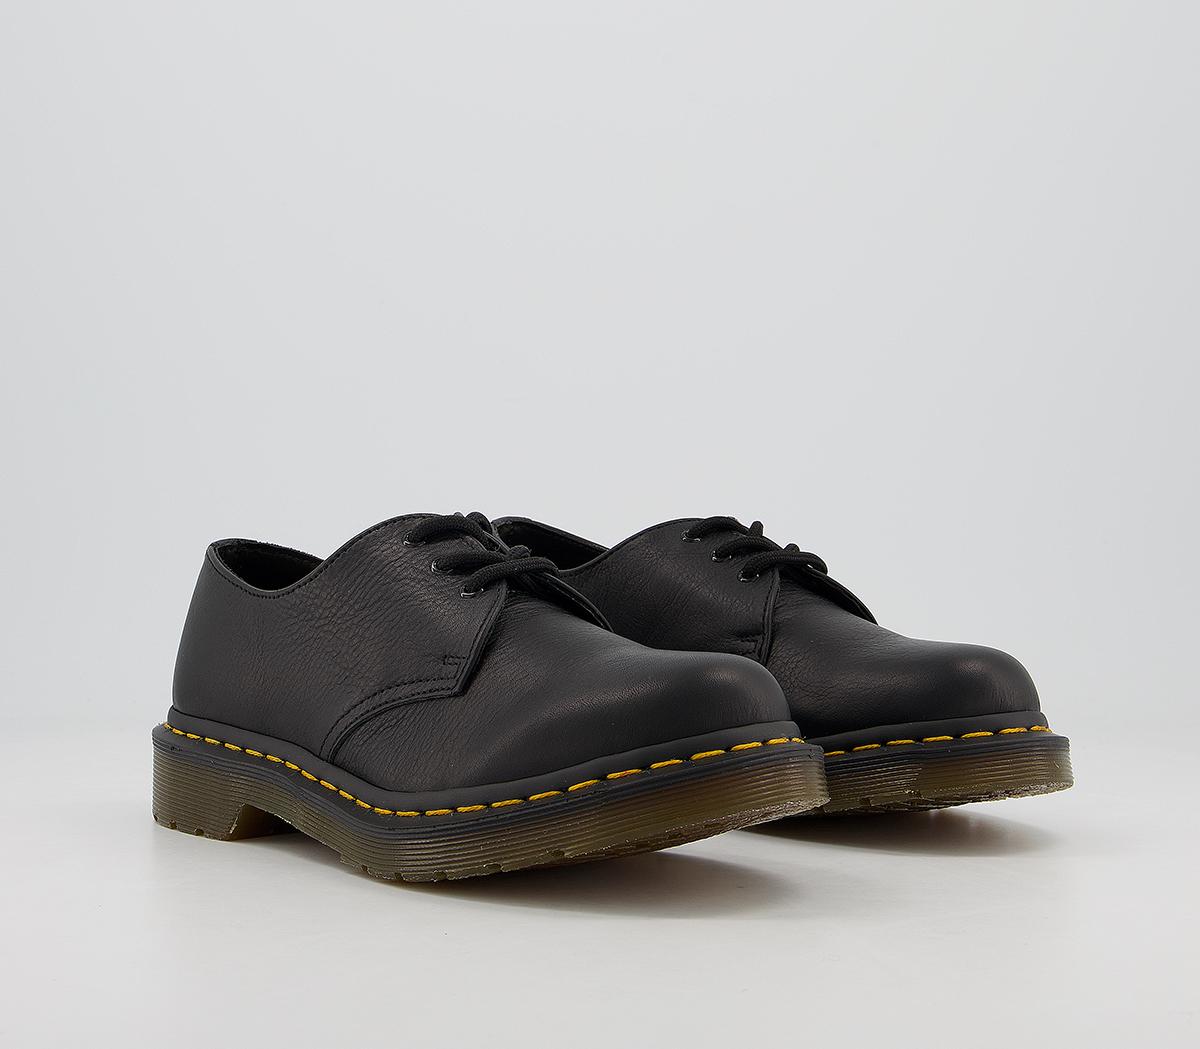 Dr. Martens Womens Classic 3-eyelet Black Virginia Leather Shoes, 7